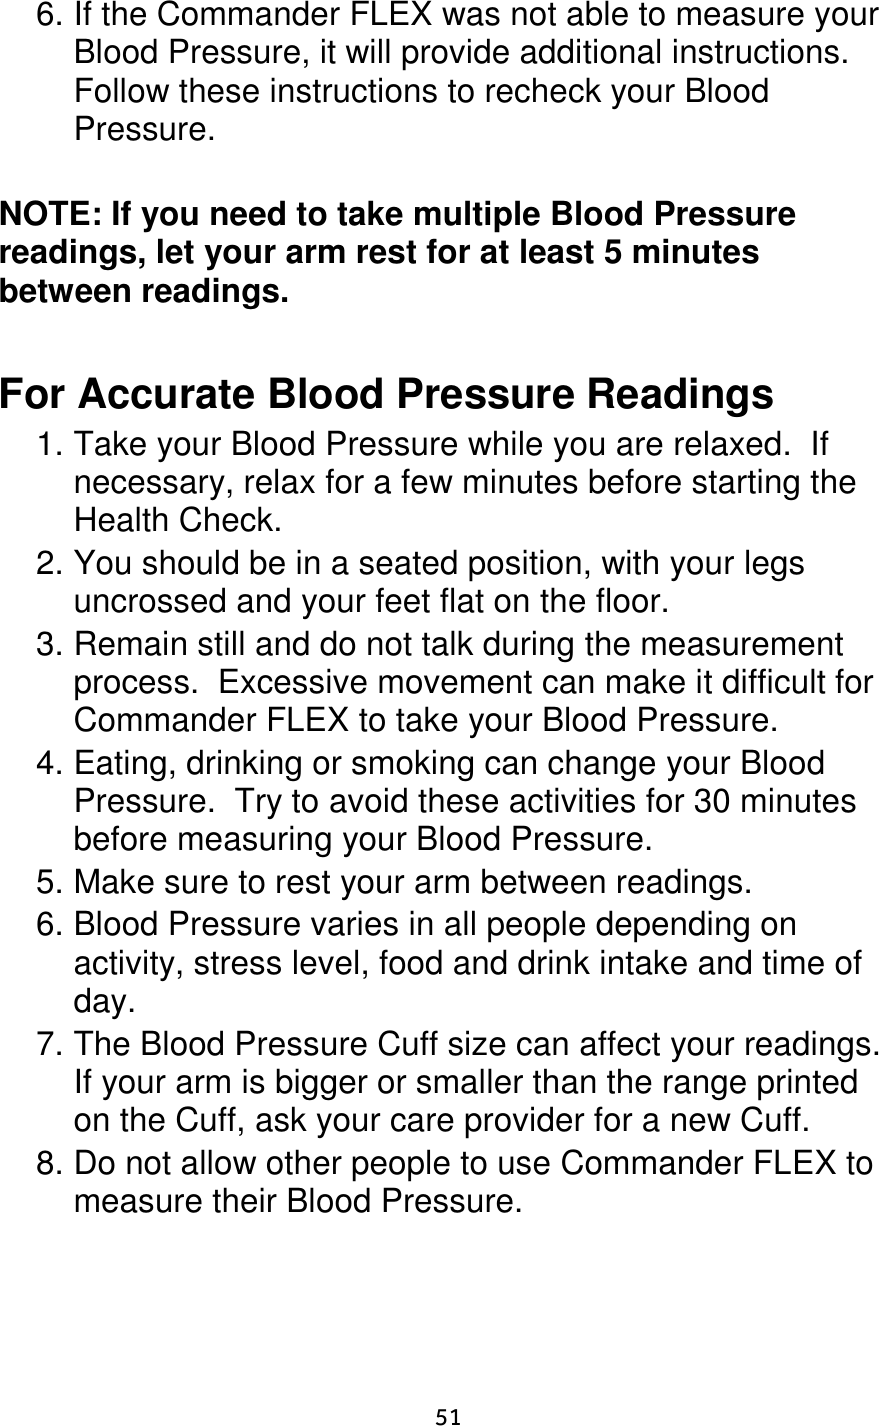                      51 6. If the Commander FLEX was not able to measure your Blood Pressure, it will provide additional instructions.  Follow these instructions to recheck your Blood Pressure.  NOTE: If you need to take multiple Blood Pressure readings, let your arm rest for at least 5 minutes between readings.   For Accurate Blood Pressure Readings 1. Take your Blood Pressure while you are relaxed.  If necessary, relax for a few minutes before starting the Health Check. 2. You should be in a seated position, with your legs uncrossed and your feet flat on the floor. 3. Remain still and do not talk during the measurement process.  Excessive movement can make it difficult for Commander FLEX to take your Blood Pressure. 4. Eating, drinking or smoking can change your Blood Pressure.  Try to avoid these activities for 30 minutes before measuring your Blood Pressure. 5. Make sure to rest your arm between readings. 6. Blood Pressure varies in all people depending on activity, stress level, food and drink intake and time of day. 7. The Blood Pressure Cuff size can affect your readings.  If your arm is bigger or smaller than the range printed on the Cuff, ask your care provider for a new Cuff. 8. Do not allow other people to use Commander FLEX to measure their Blood Pressure. 